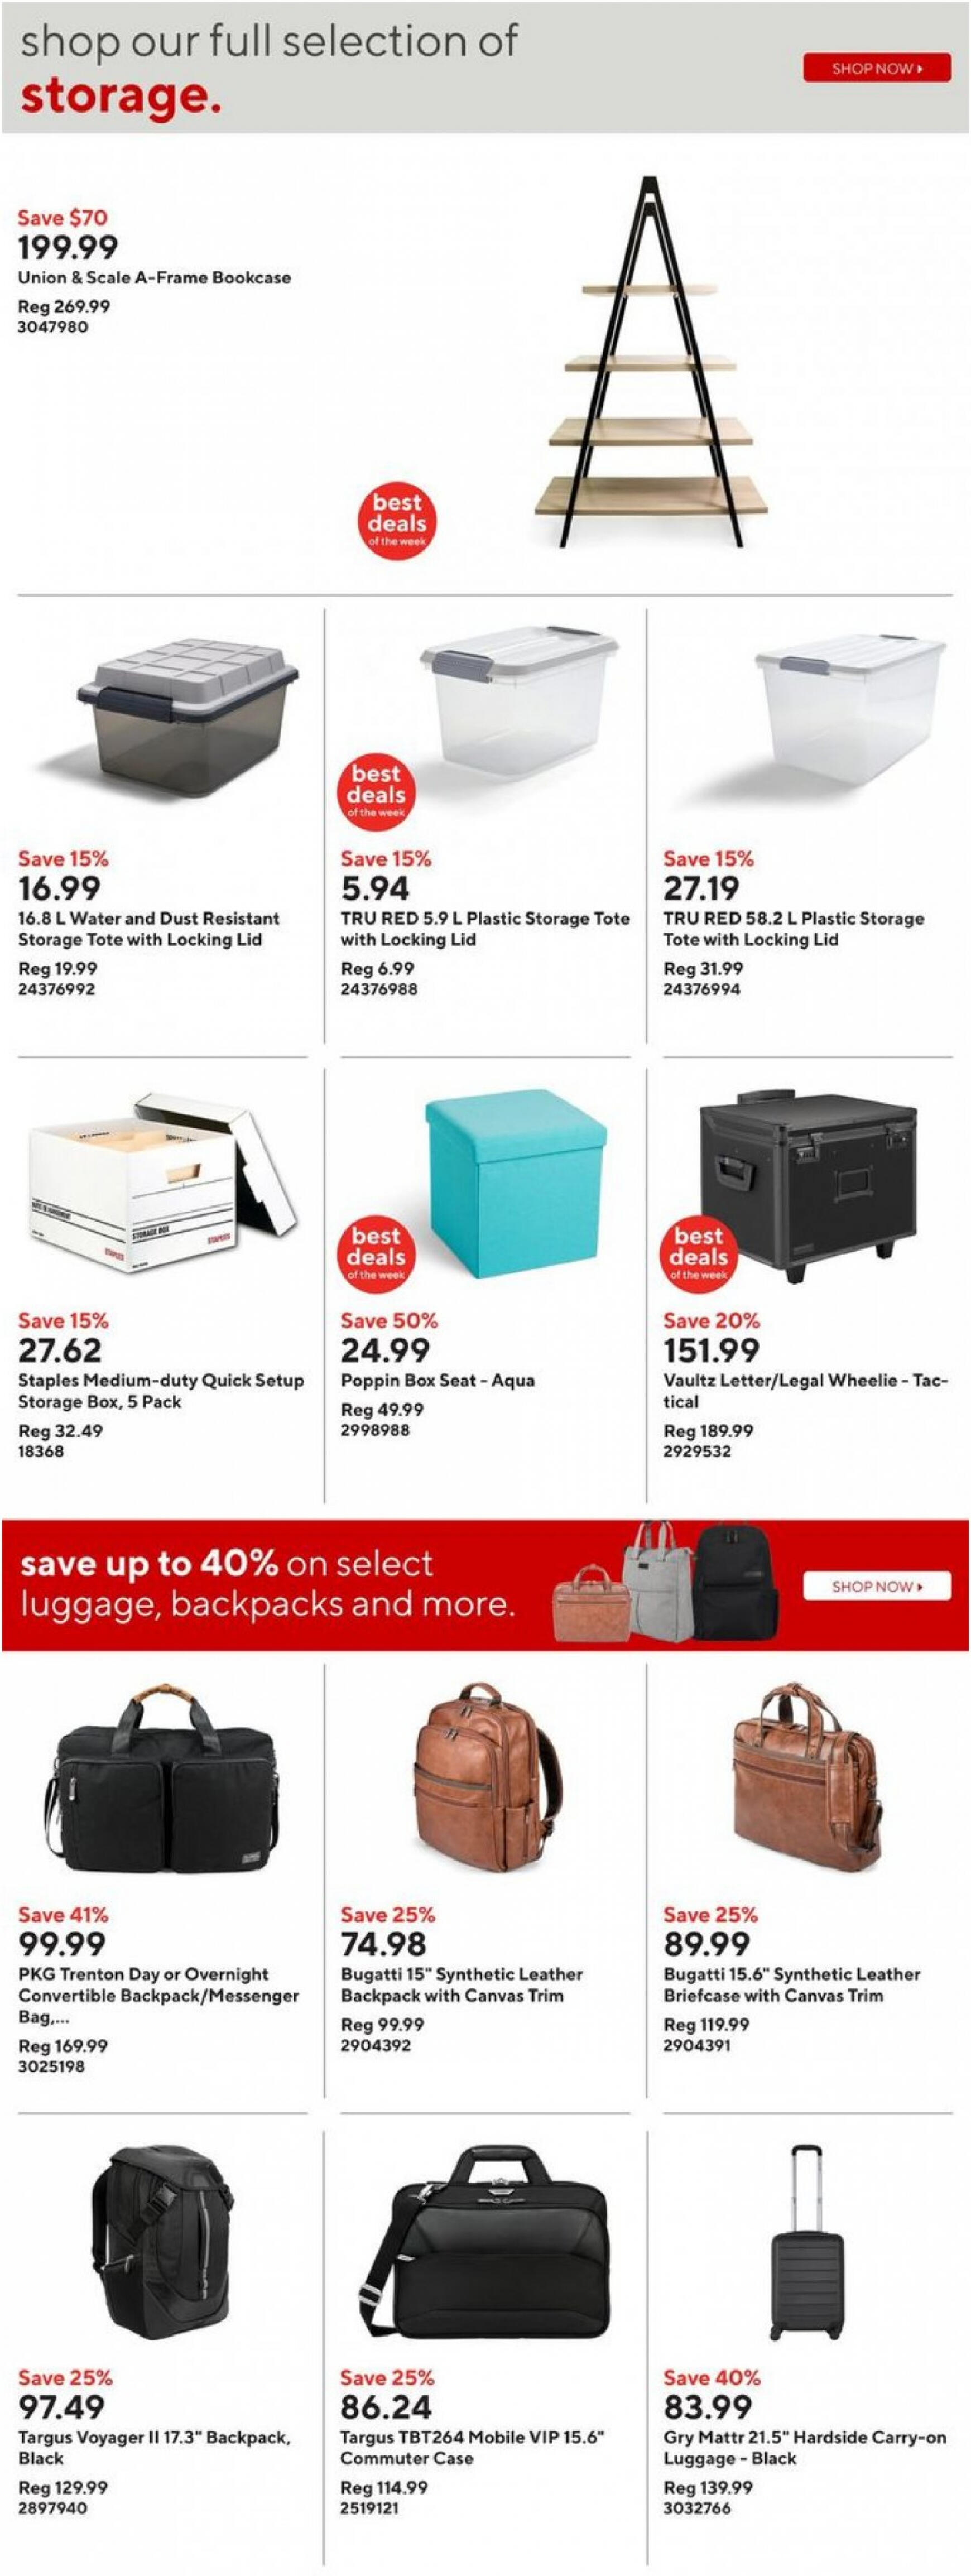 staples - Staples - Weekly flyer current 10.04. - 17.04. - page: 17